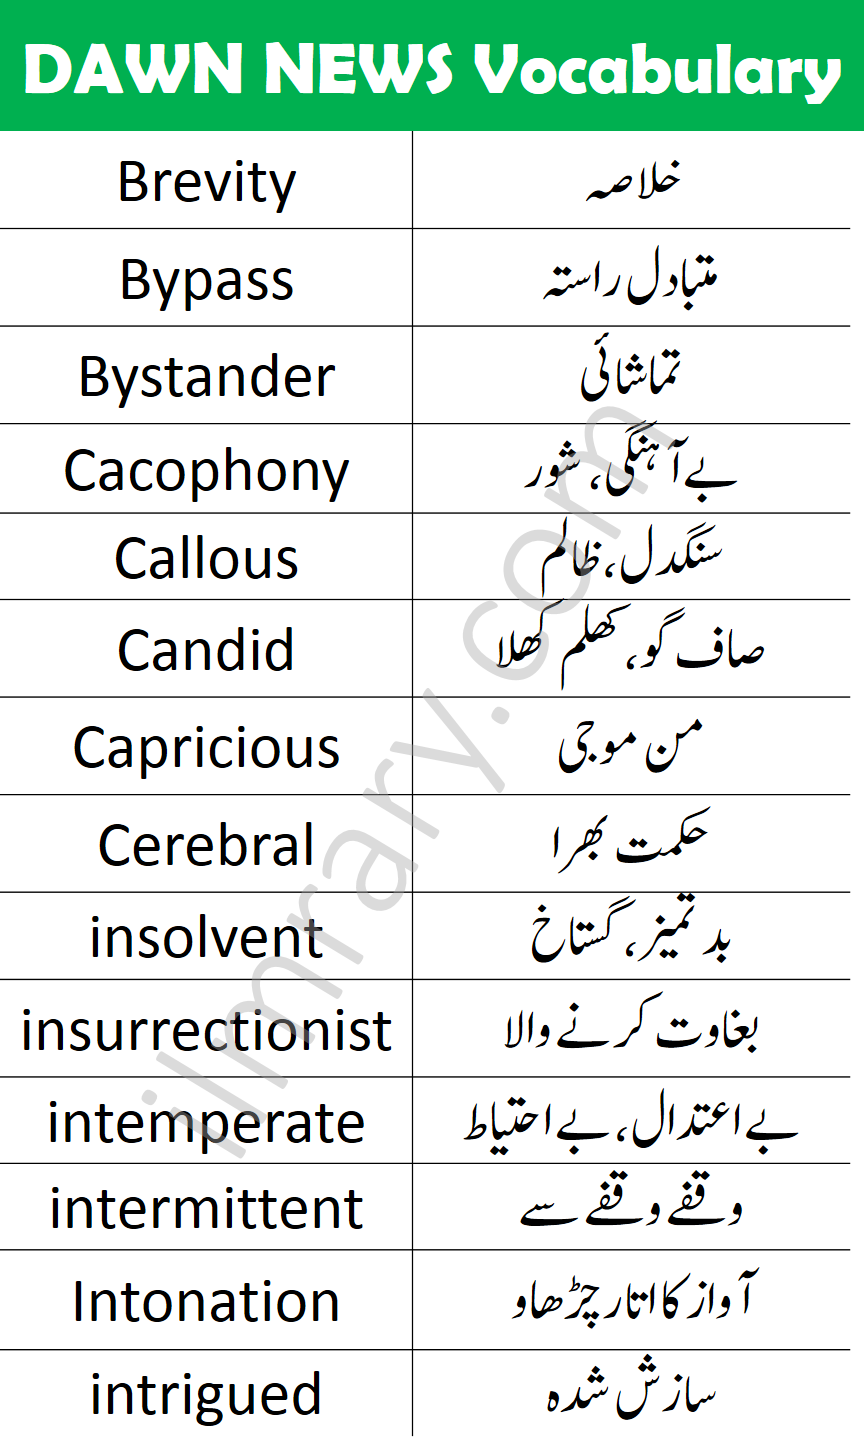 500 Dawn Newspaper Vocabulary Words with Urdu Meanings